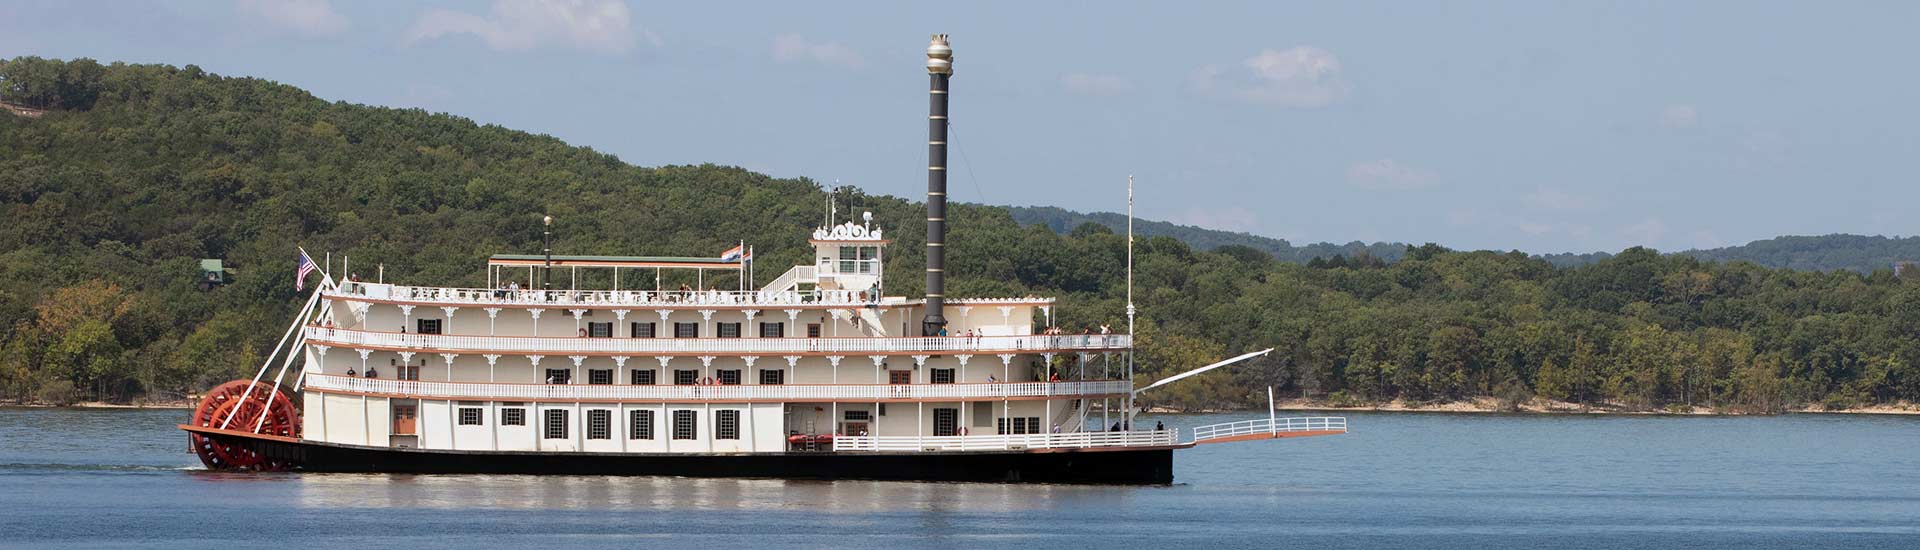 The Branson Belle Showboat glides across Table Rock Lake with its paddle wheel in motion and the Branson hills in background.